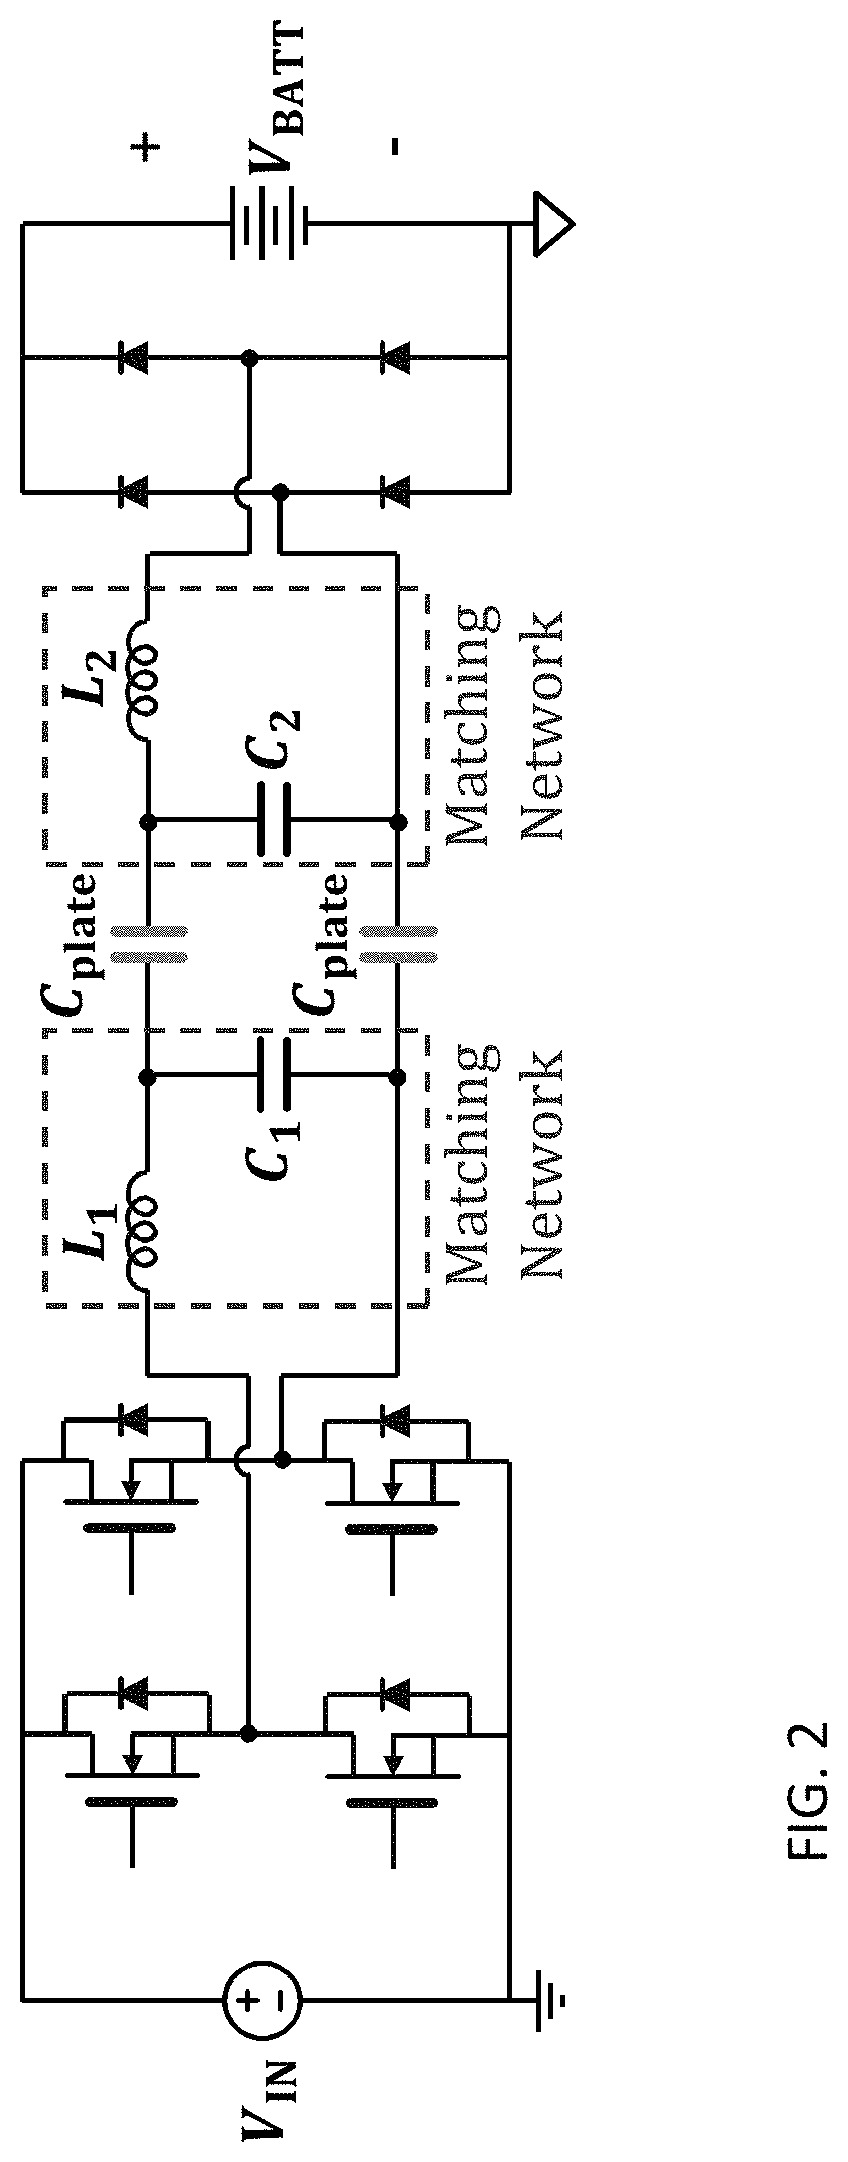 Matching networks, inductors, and coupled-inductor capacitive wireless power transfer circuit and related techniques